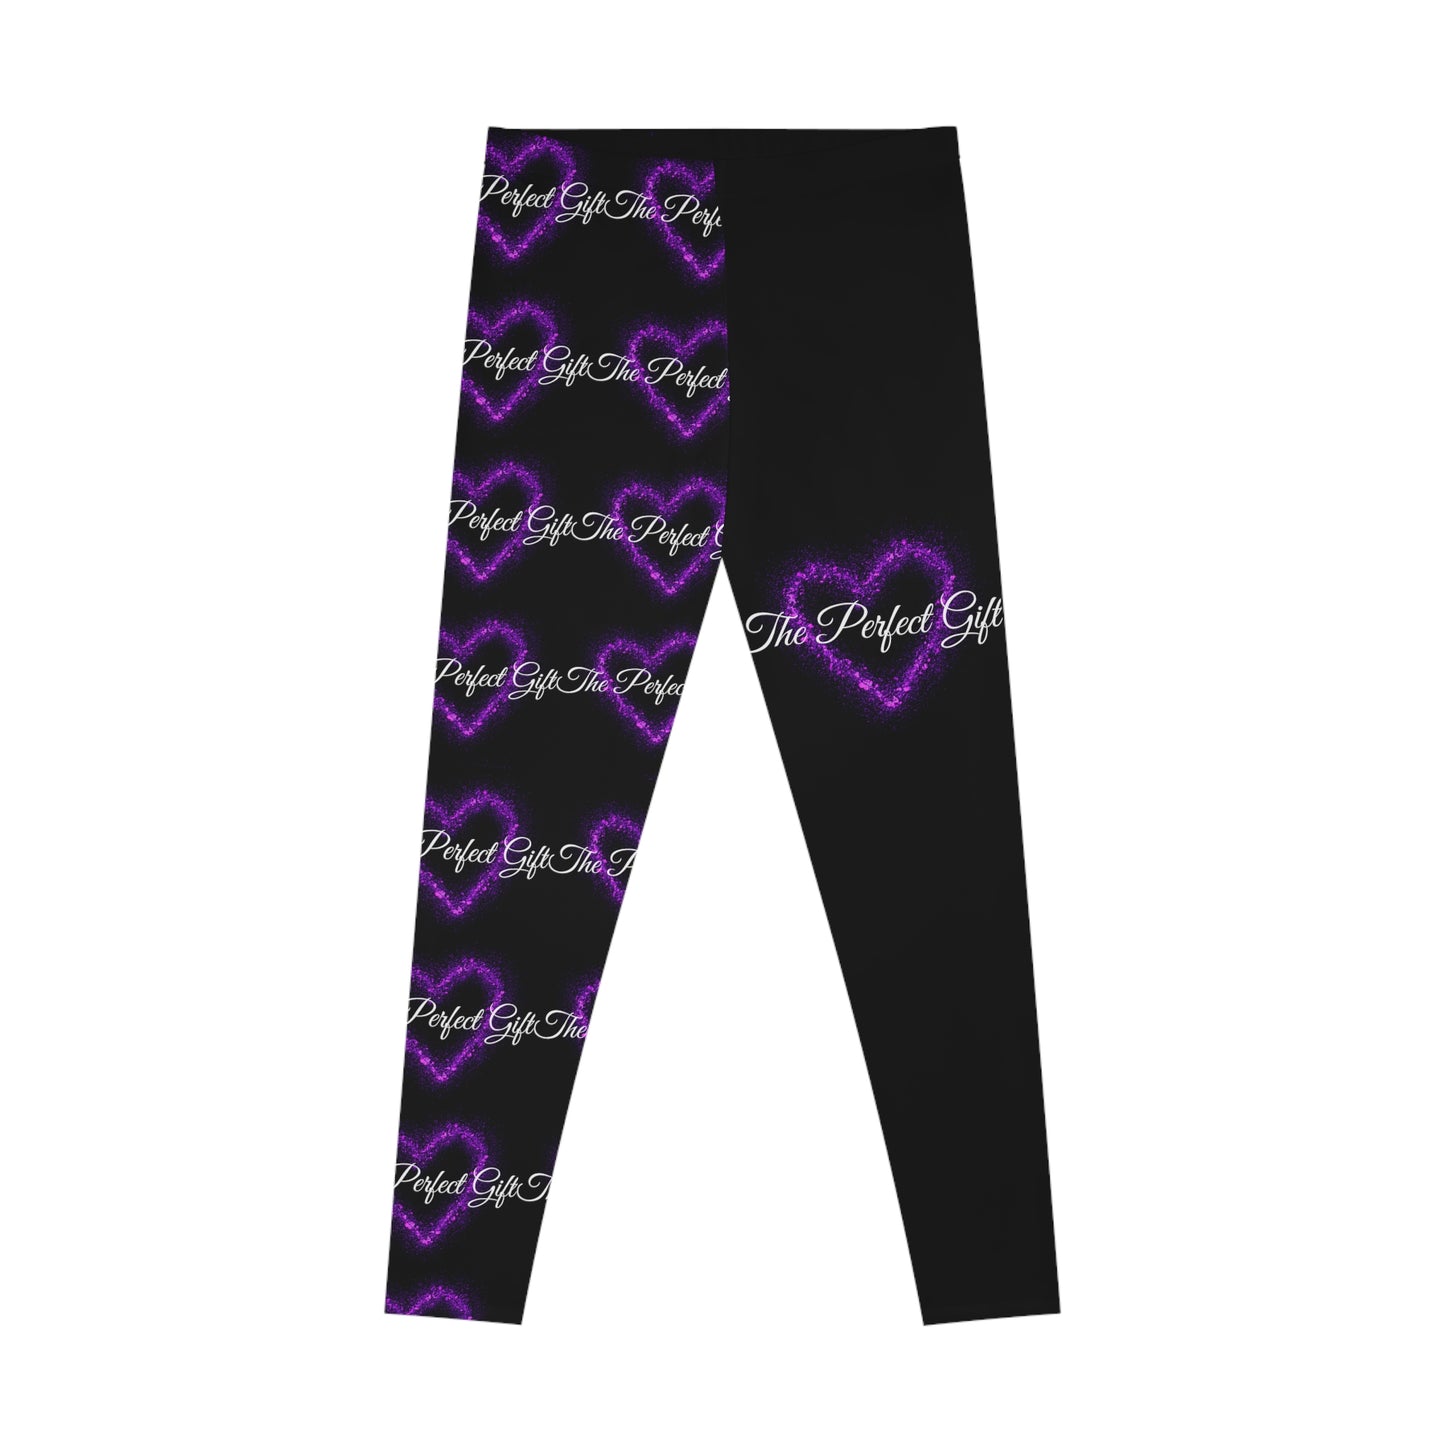 The Perfect Gift, Stretchy Leggings, Valentines Day Gift, Gift For Her, Black Leggings